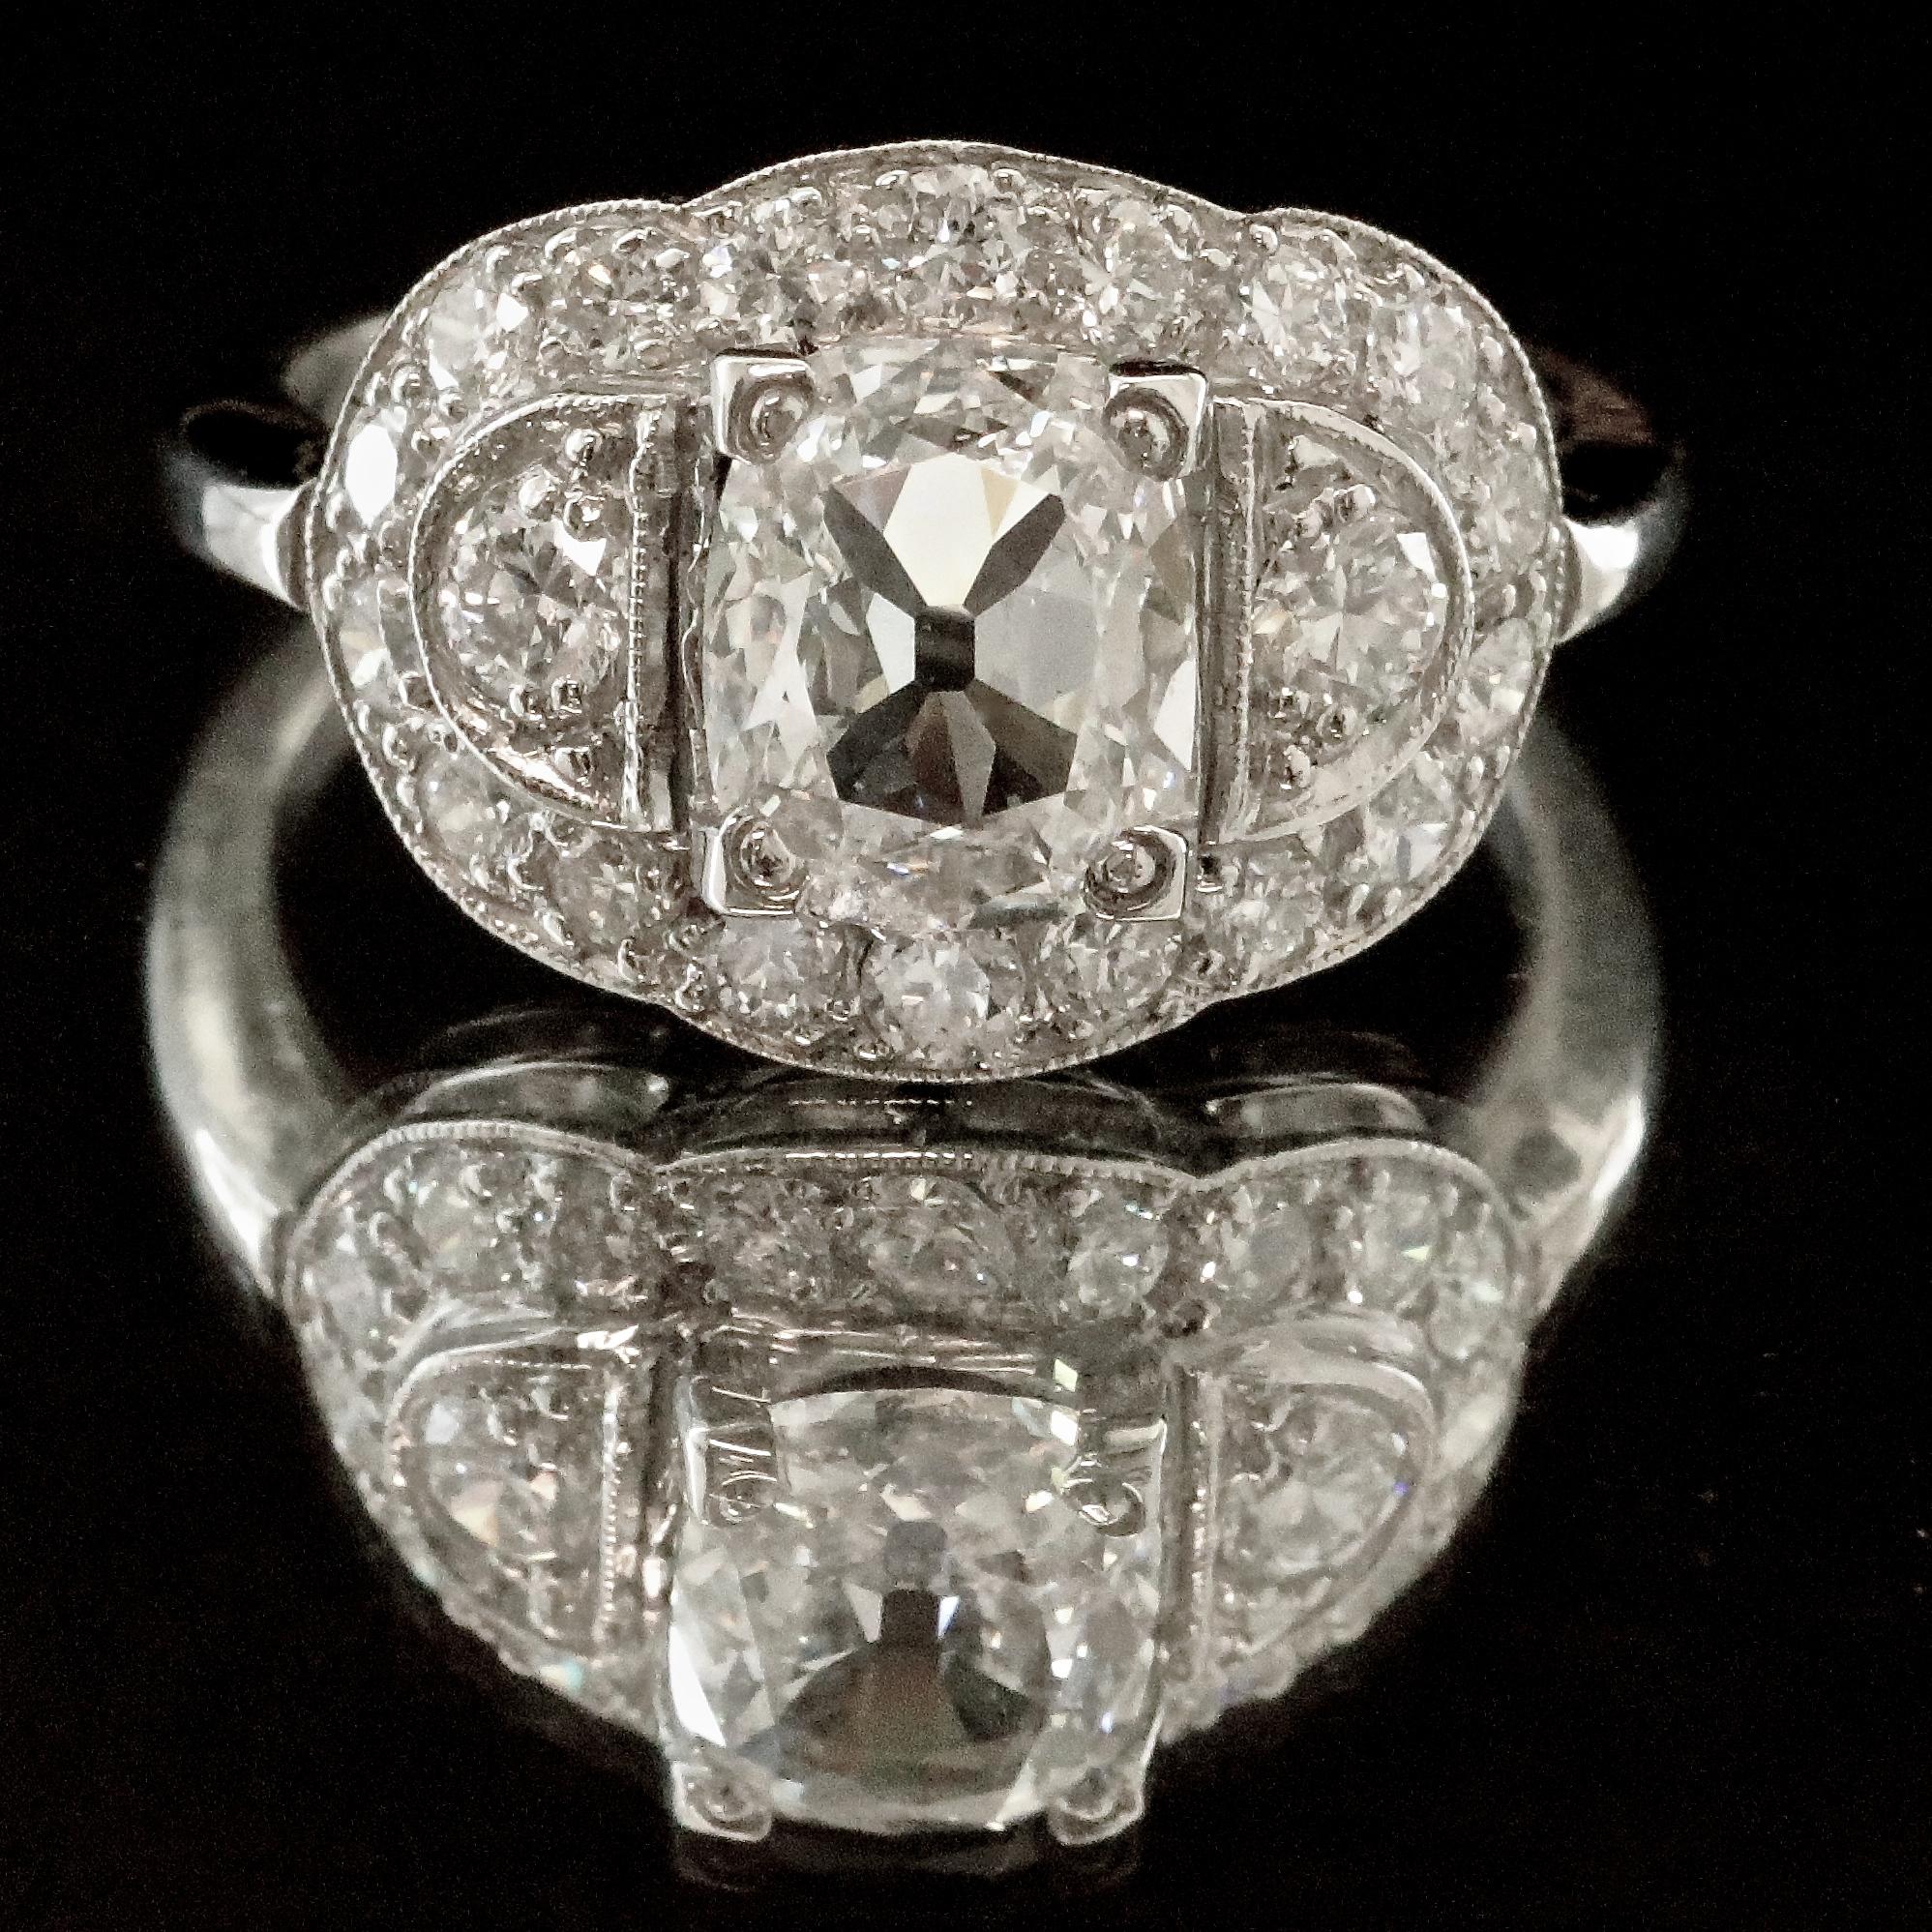 A classic Late Art Deco diamond cluster ring from the 1930's. The ring is graceful and the smooth, thin band makes it a perfect everyday accessory. Enjoy the freshness of this beauty from long ago. GIA graded cushion cut diamond 1.52 carat, F color